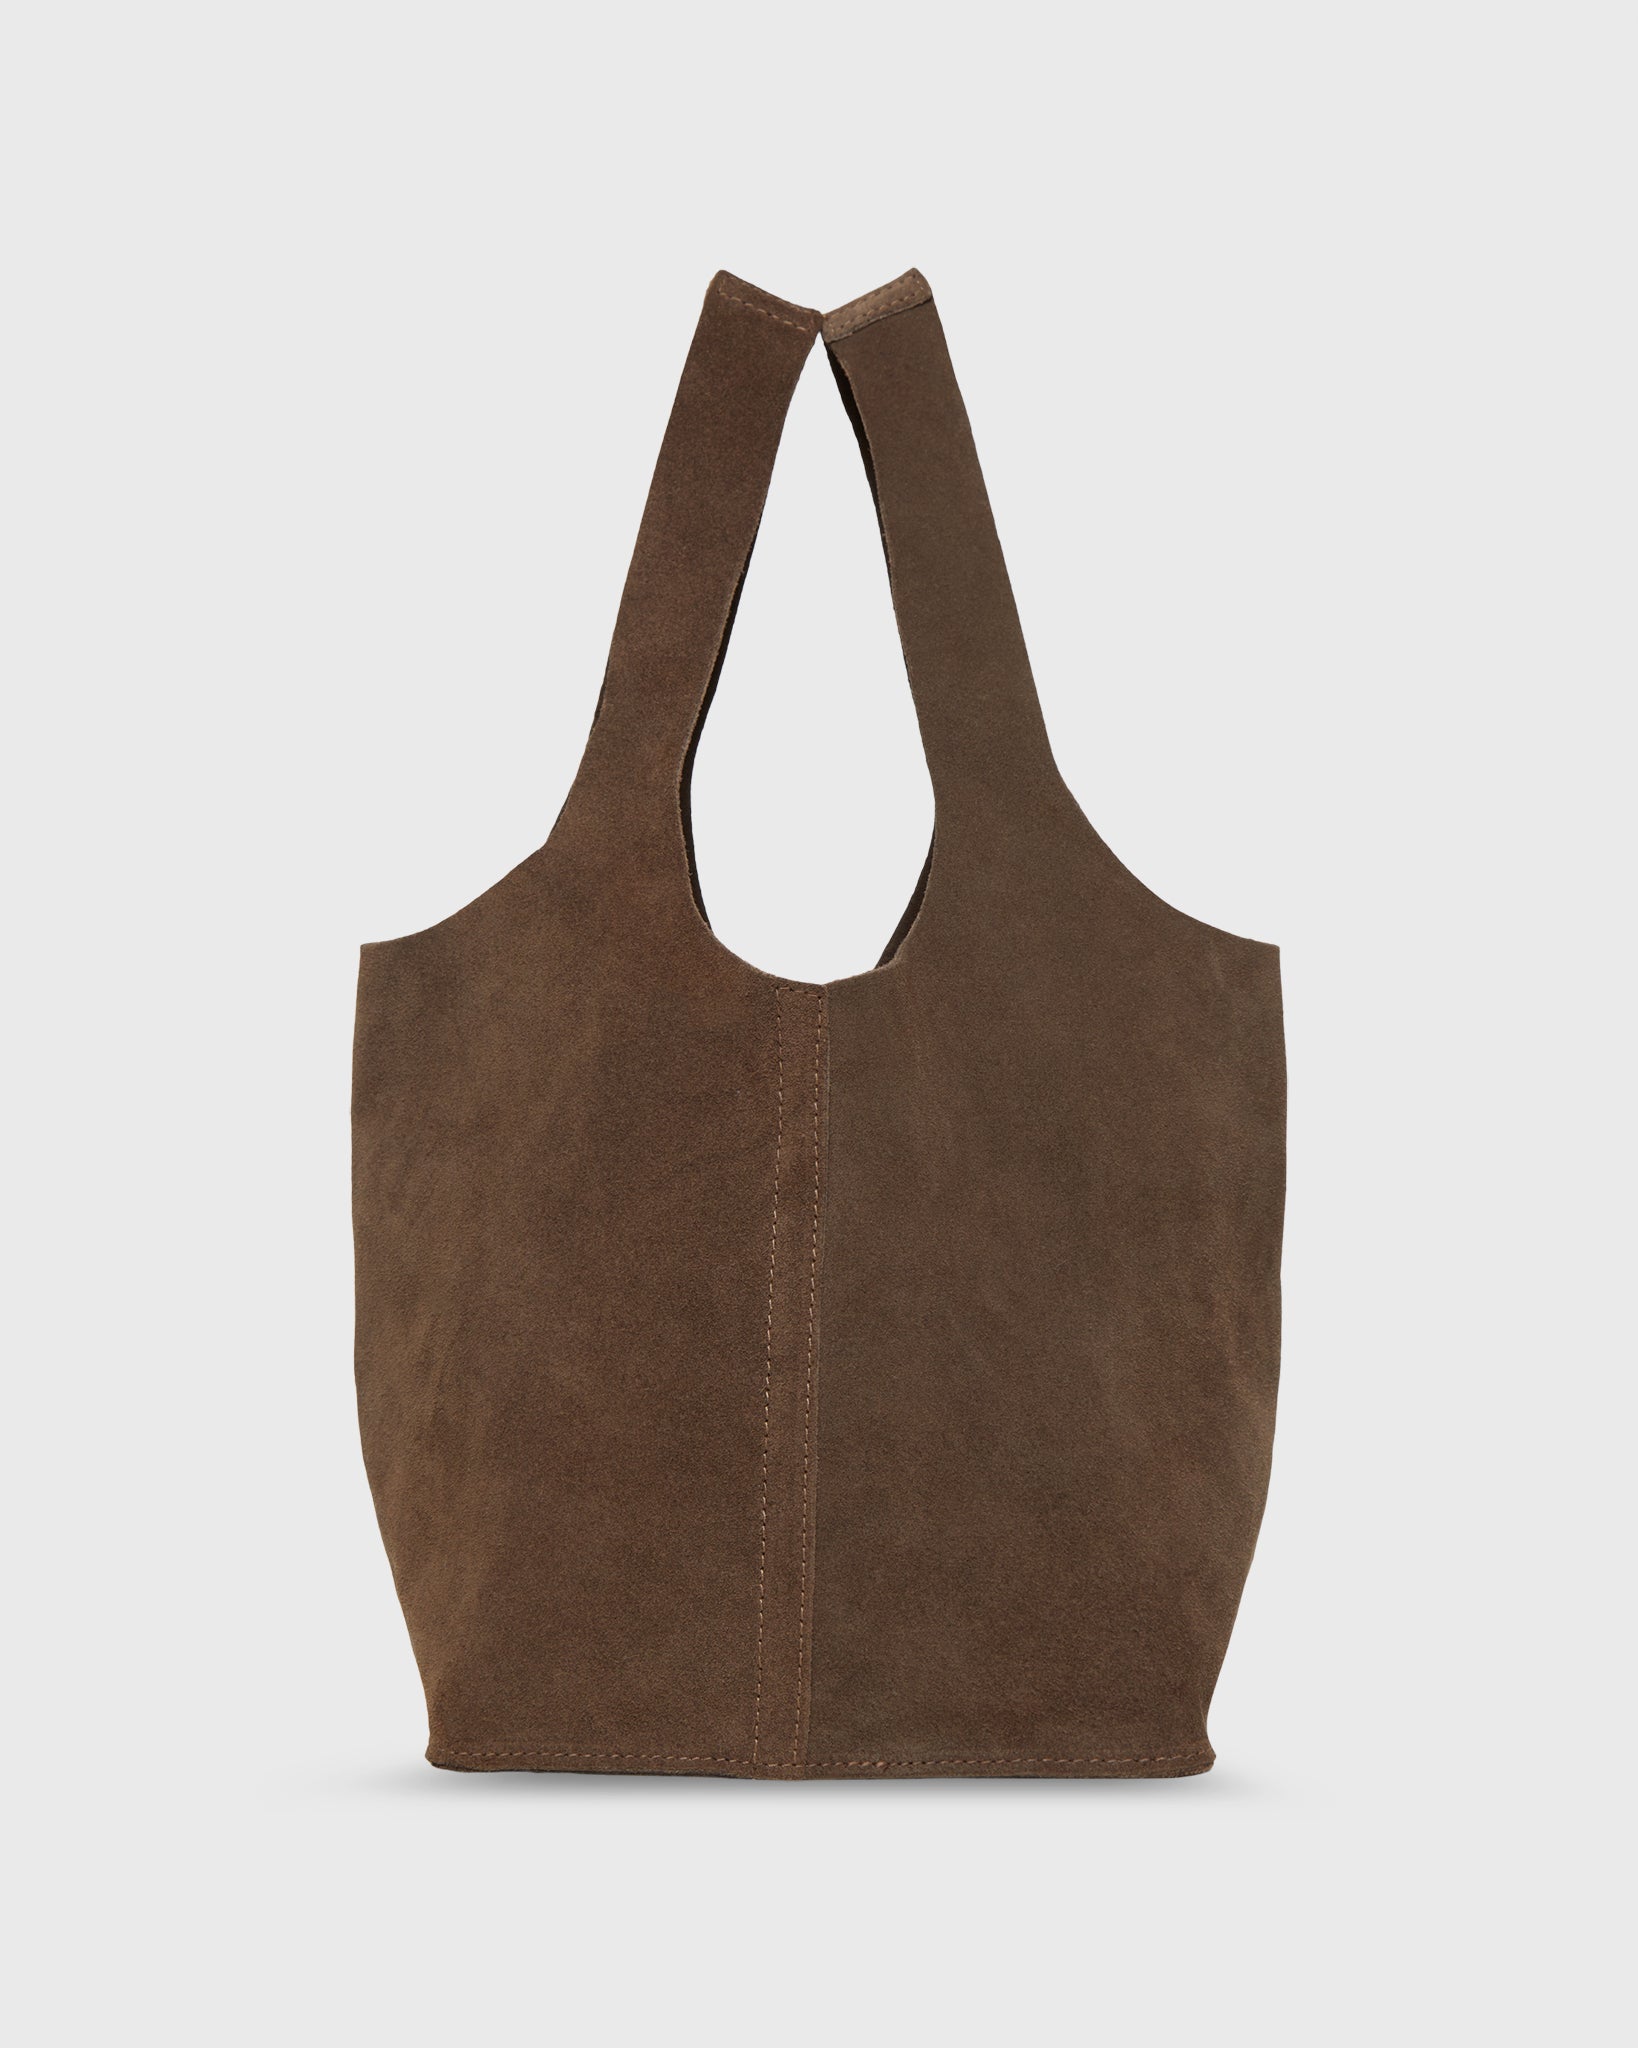 Paola Bucket Bag in Chocolate Suede